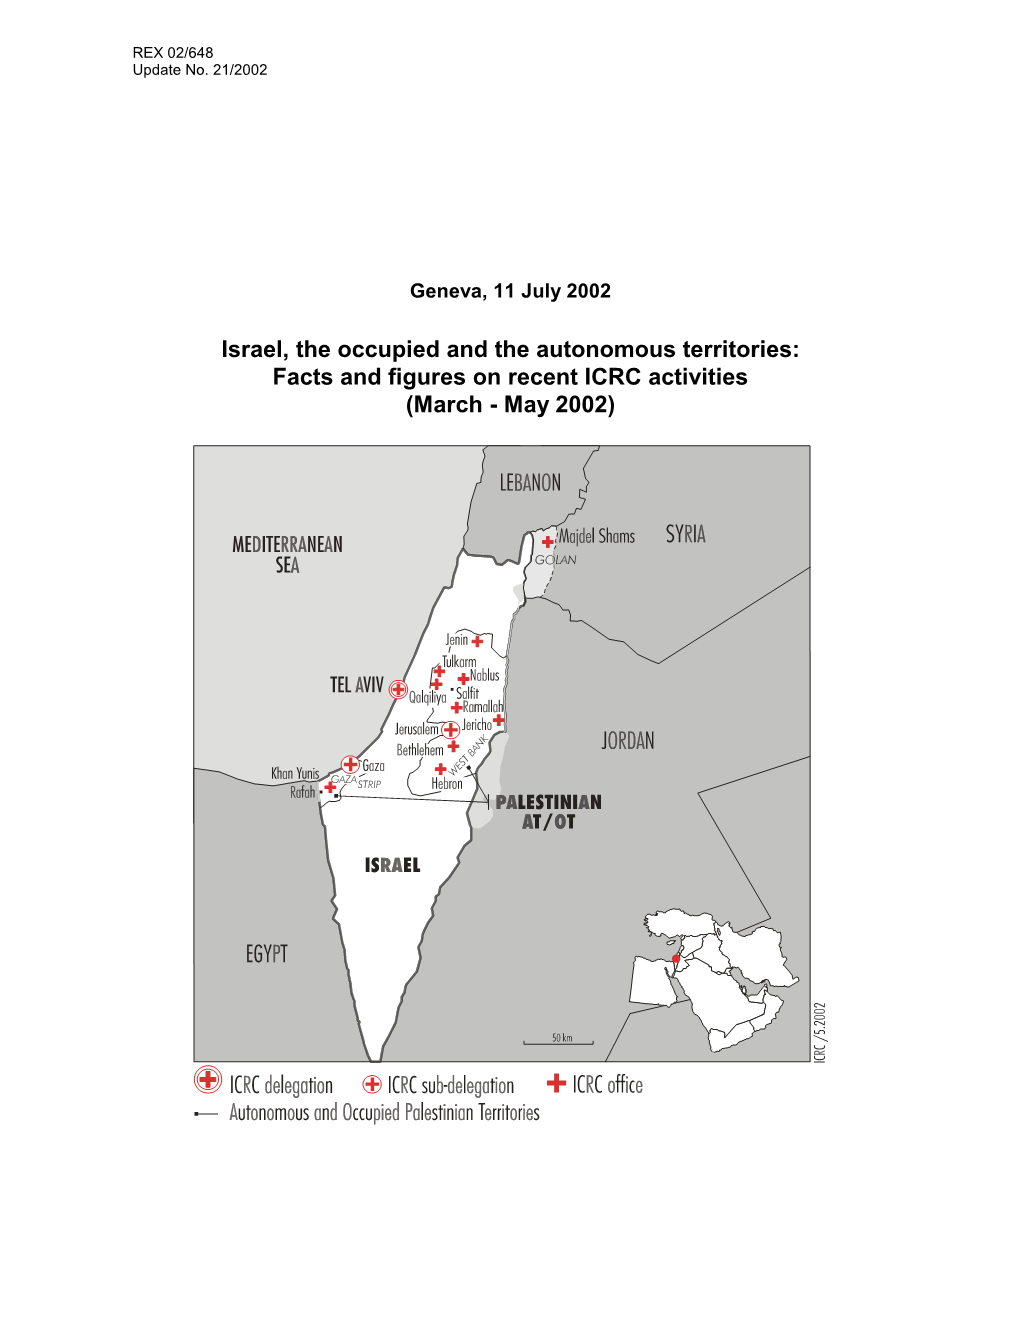 Israel, the Occupied and the Autonomous Territories: Facts and Figures on Recent ICRC Activities (March - May 2002) ICRC REX - Update No